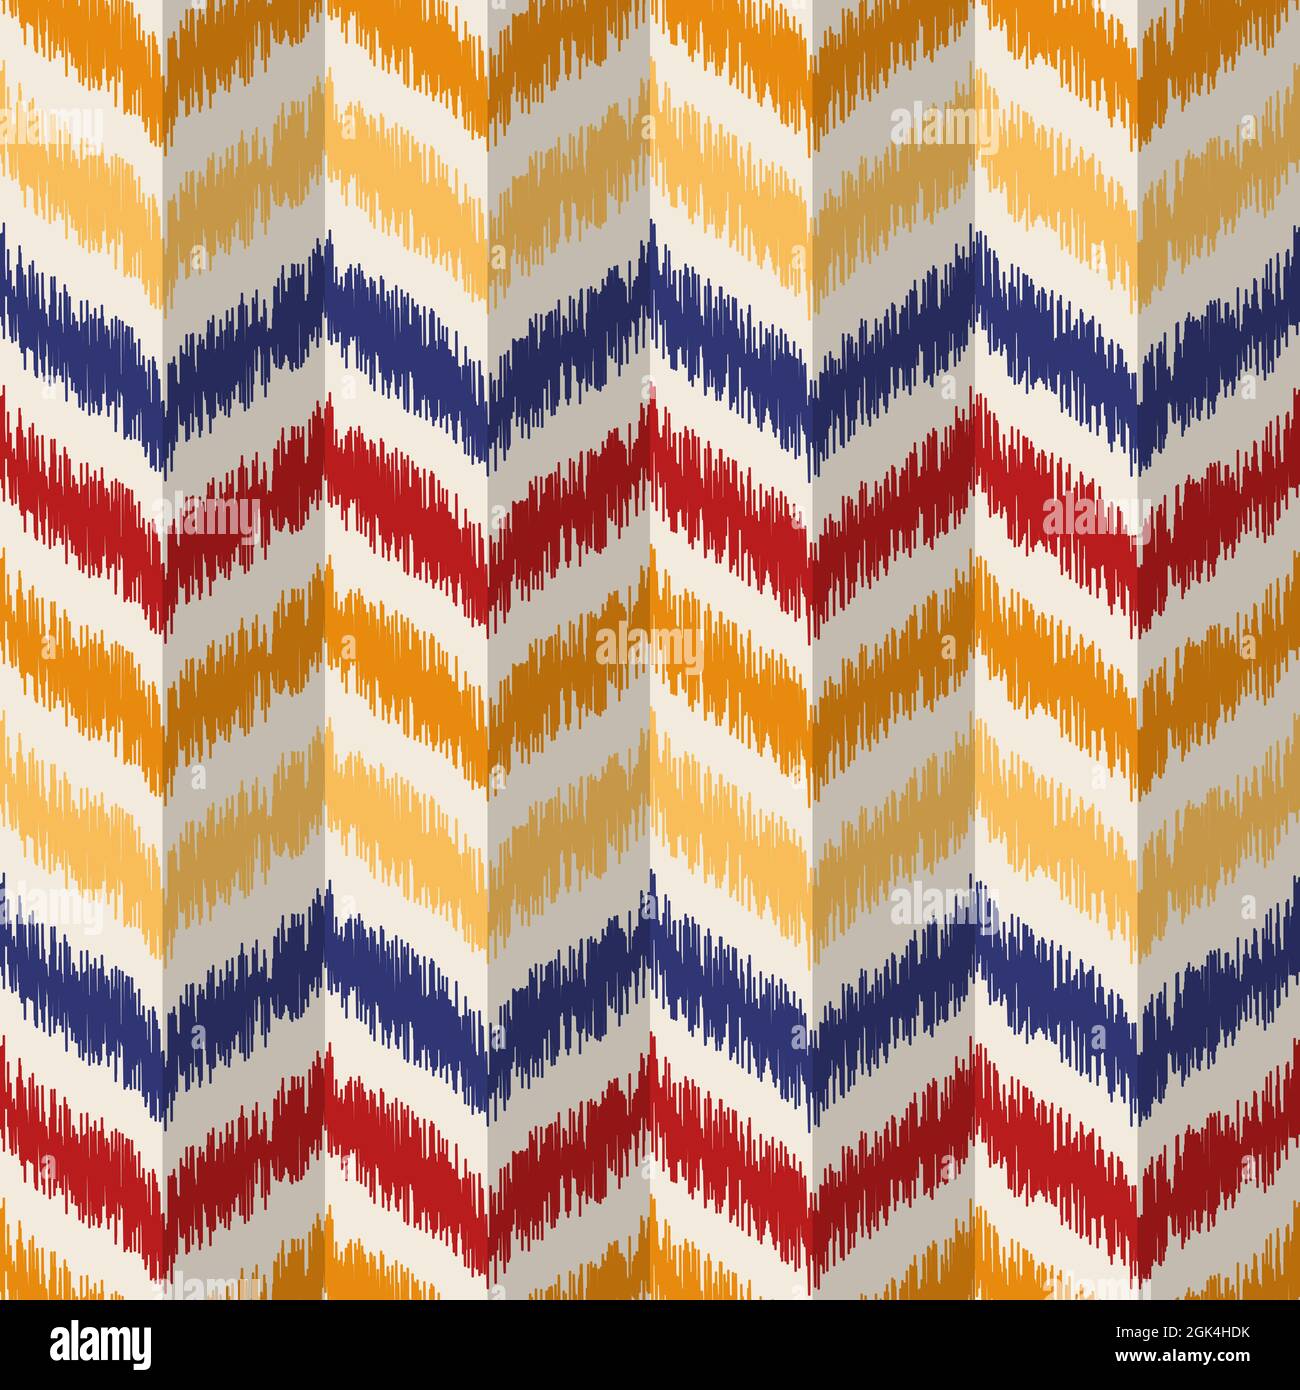 Seamless geometric pattern, based on ikat fabric style. Vector illustration. Chevron rug pattern. Colorful zig-zag pattern. Yellow, orange and red her Stock Vector